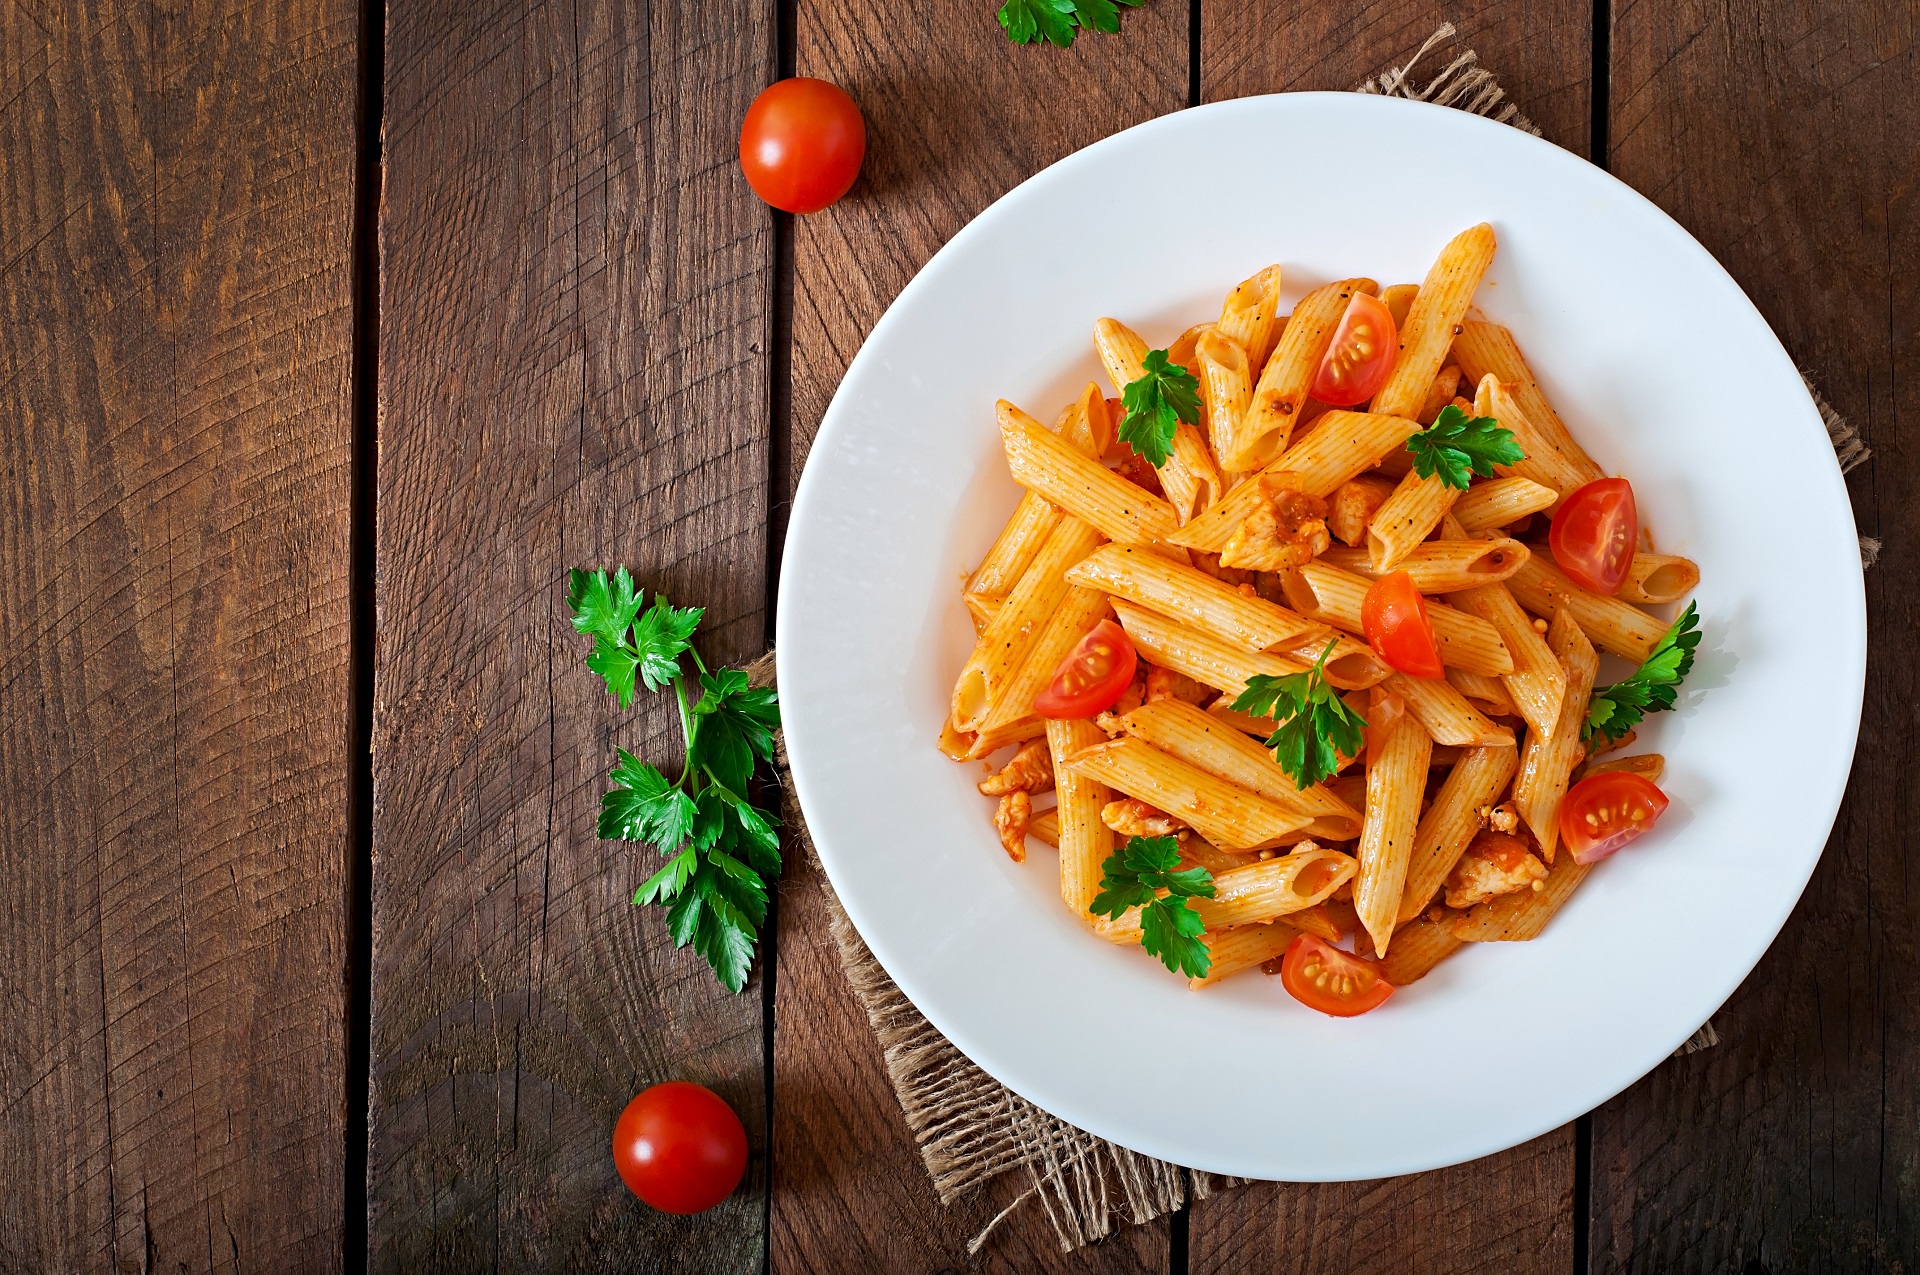 Penne is a type of pasta. 